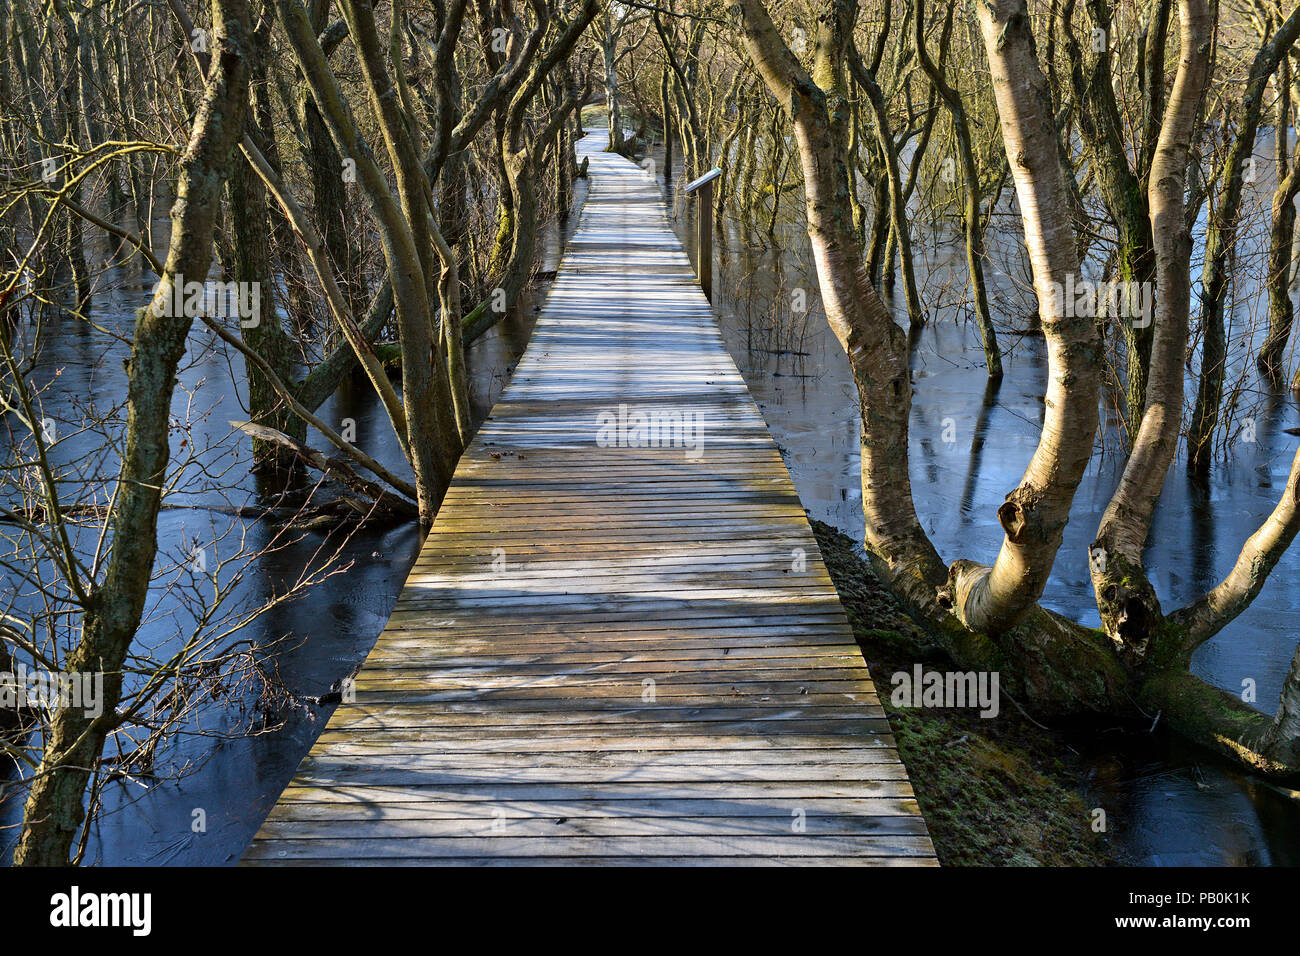 Giant boardwalk surrounded by water and trees of the Bruchwald forest, Amrum, North Frisia, Schleswig-Holstein, Germany Stock Photo